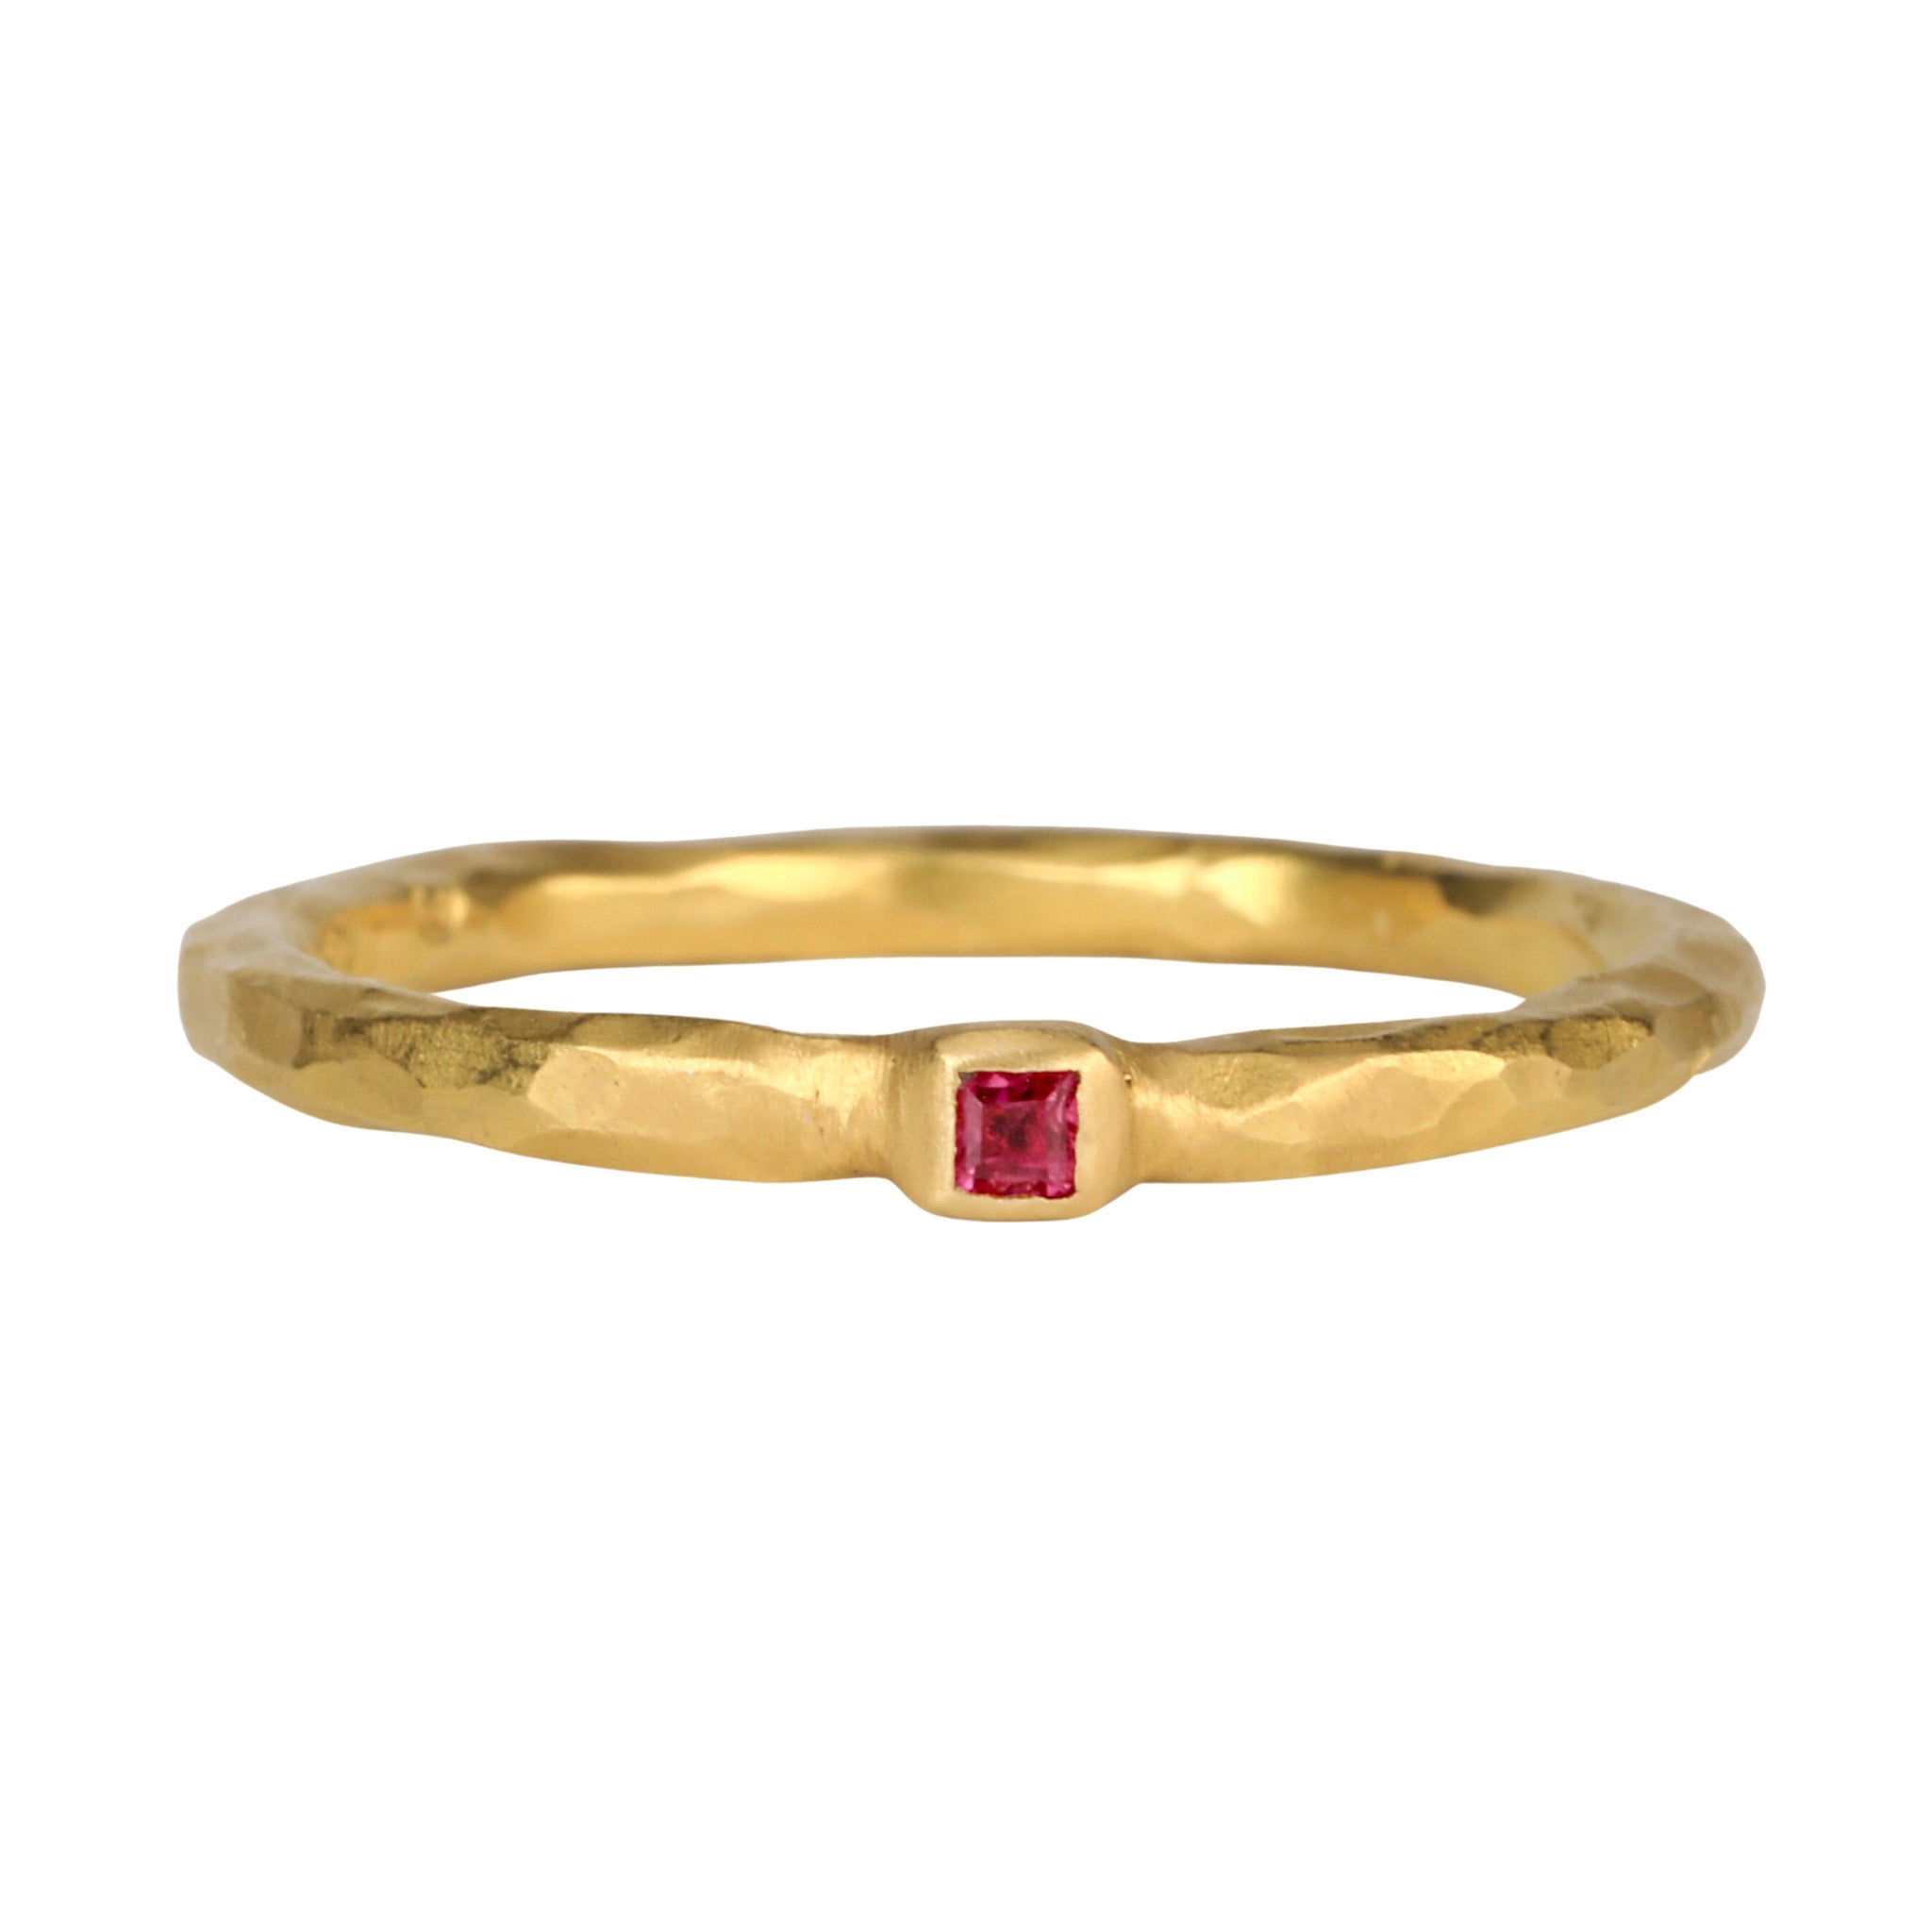 22K Gold Thin Hammered Band with Square Burmese Ruby "Floating Bezel" - Peridot Fine Jewelry - Cathy Waterman